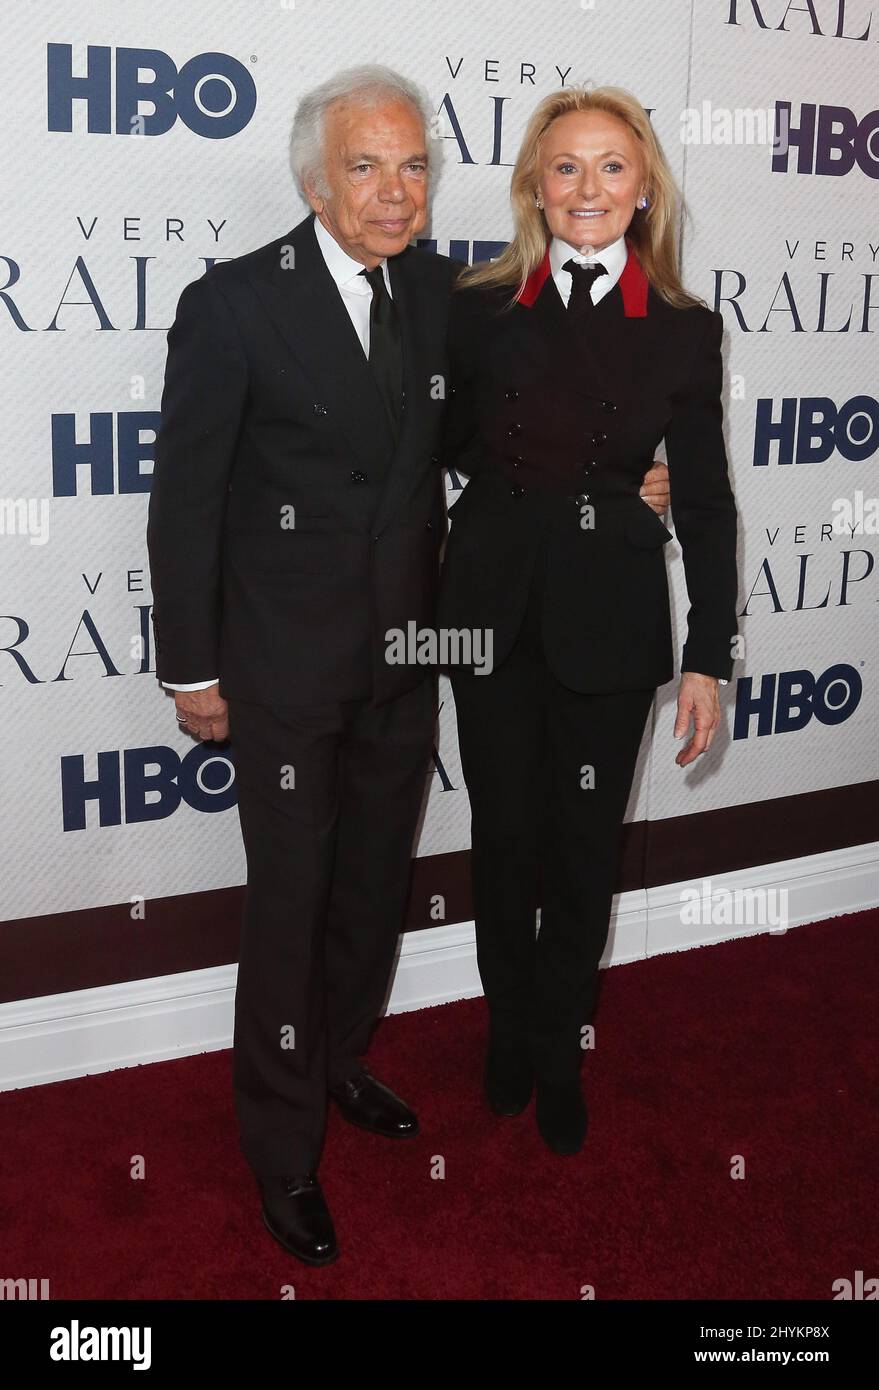 Ralph Lauren and Ricky Anne Loew-Beer attending the Very Ralph World Premiere in New York Stock Photo